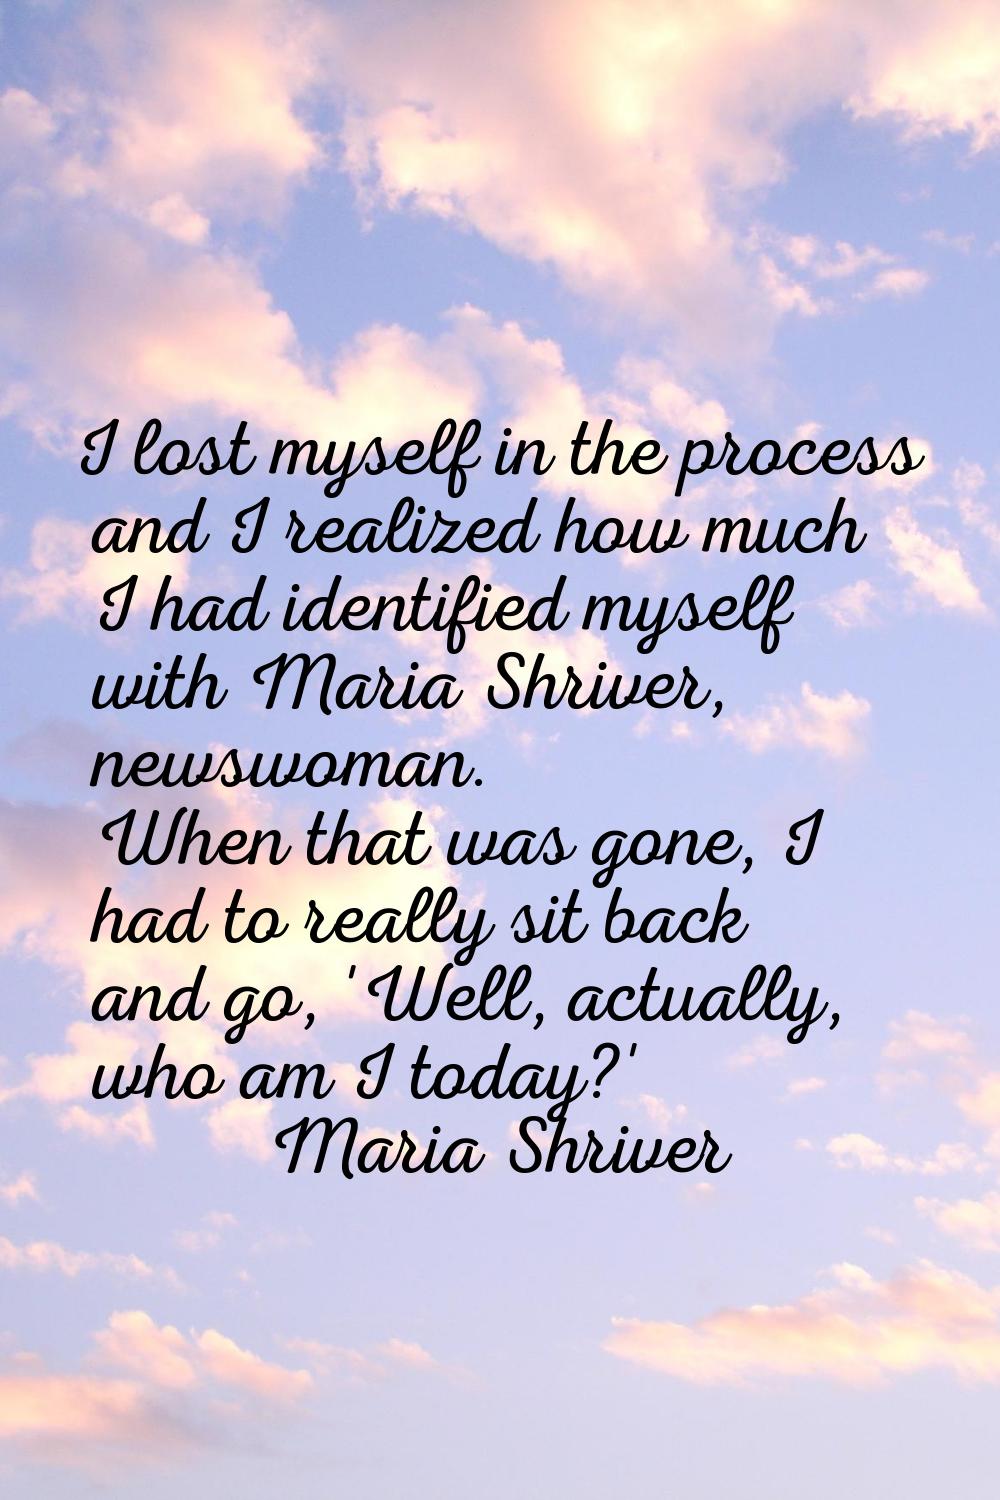 I lost myself in the process and I realized how much I had identified myself with Maria Shriver, ne